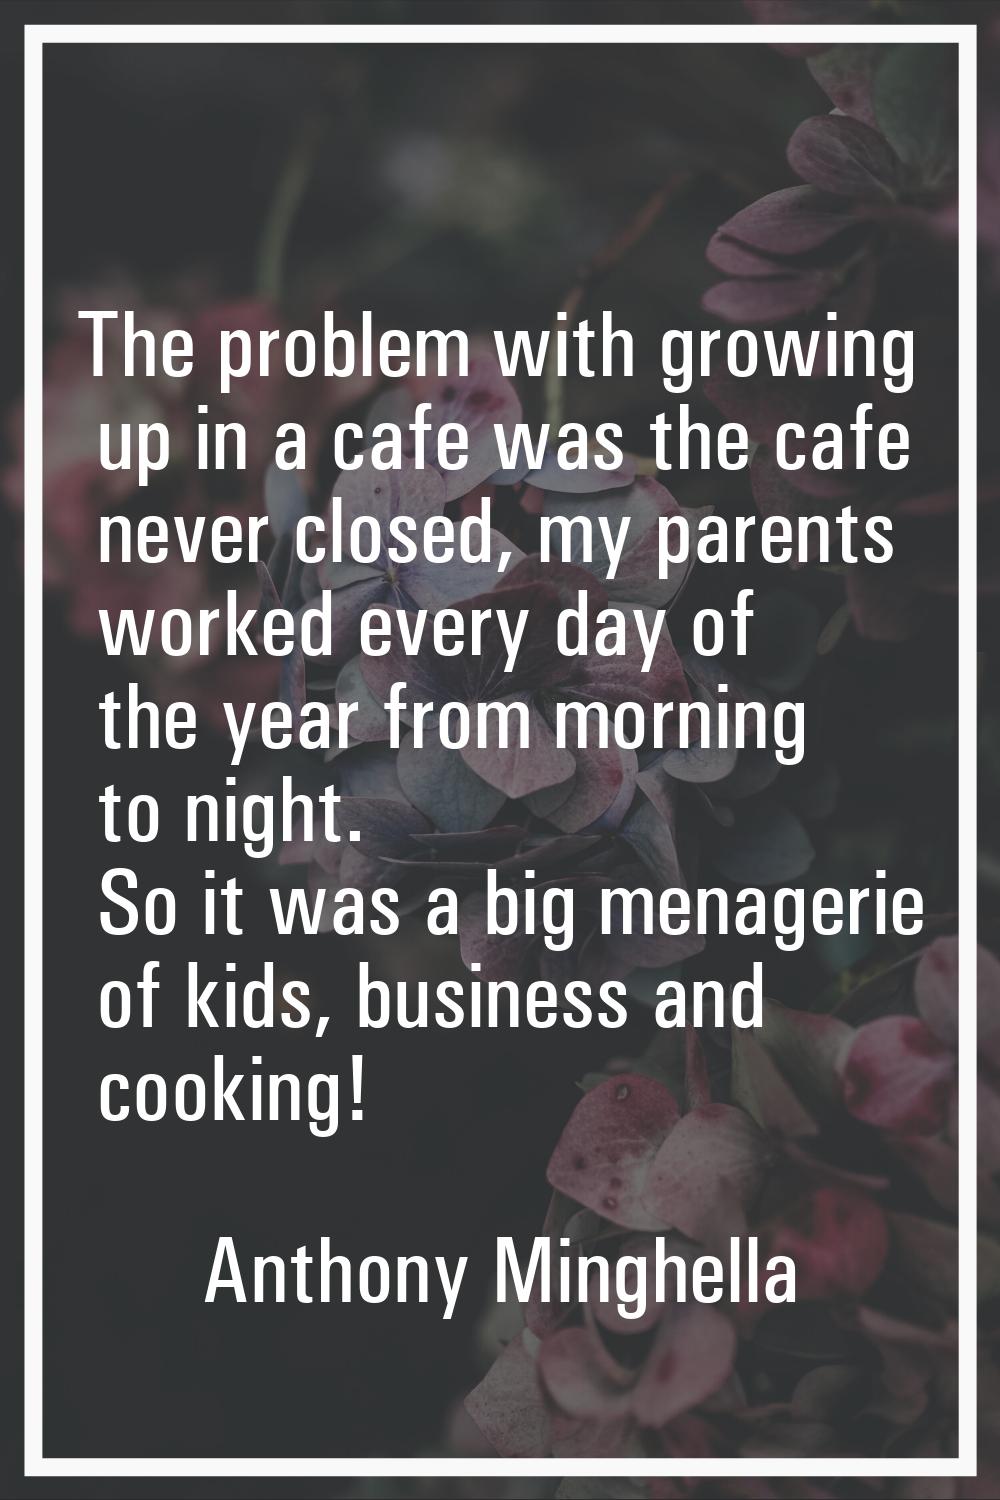 The problem with growing up in a cafe was the cafe never closed, my parents worked every day of the